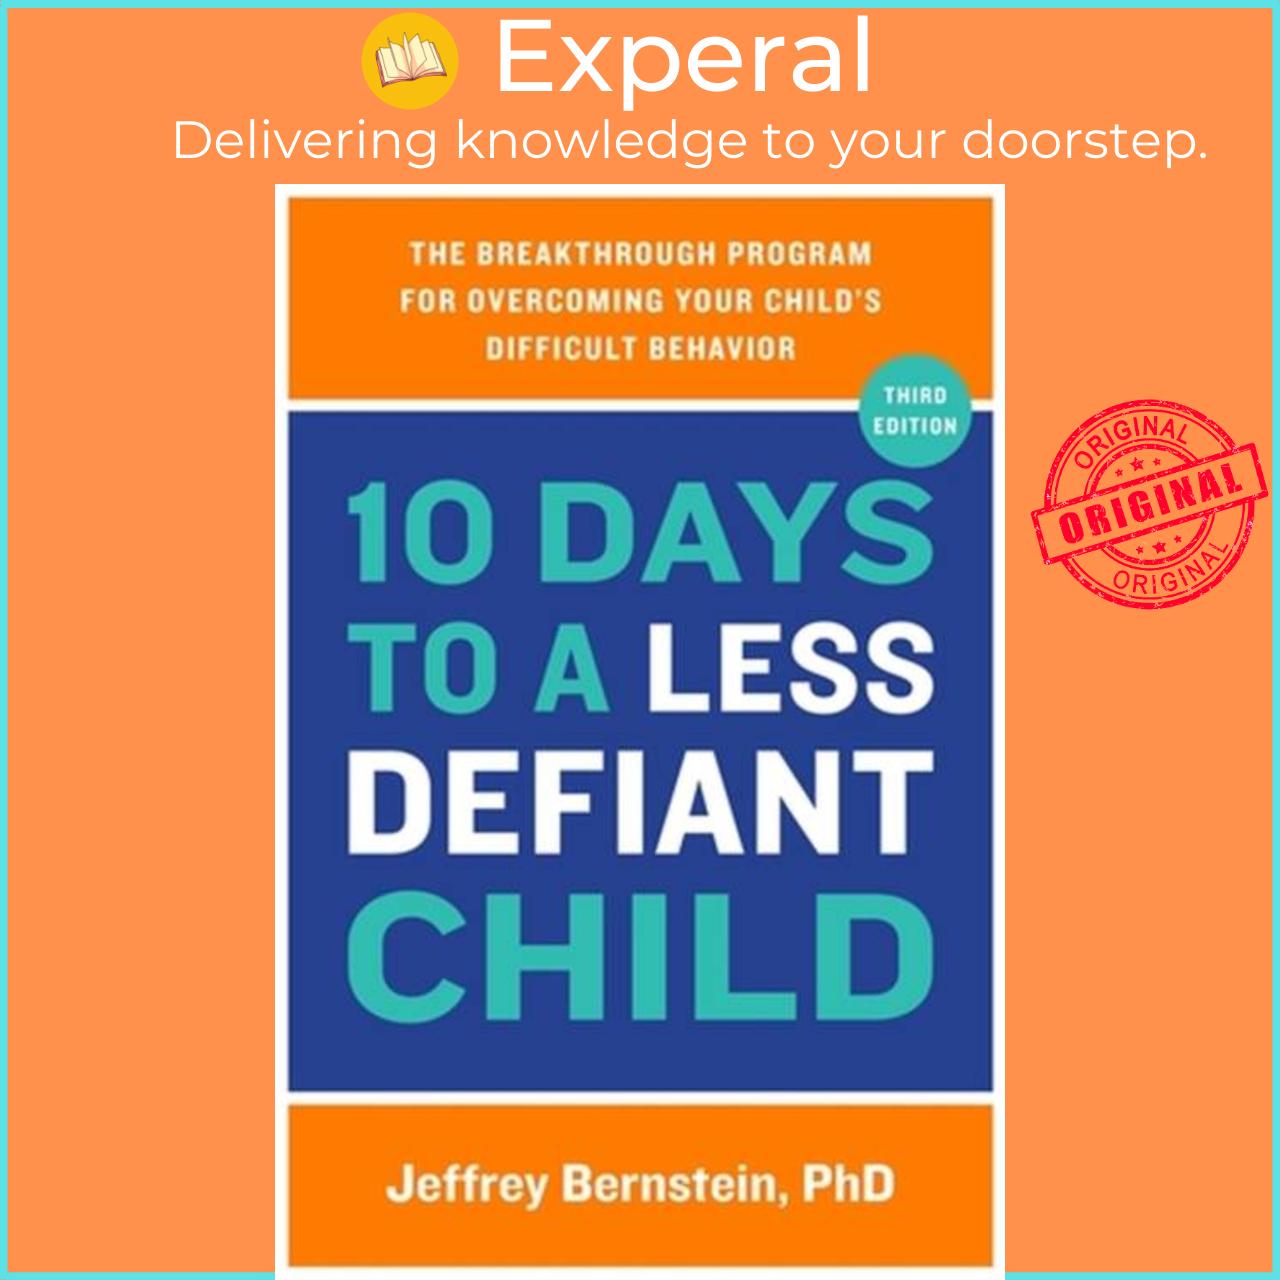 Sách - 10 Days to a Less Defiant Child - The Breakthrough Program fo by Jeffrey, Ph.D. Bernstein (UK edition, paperback)